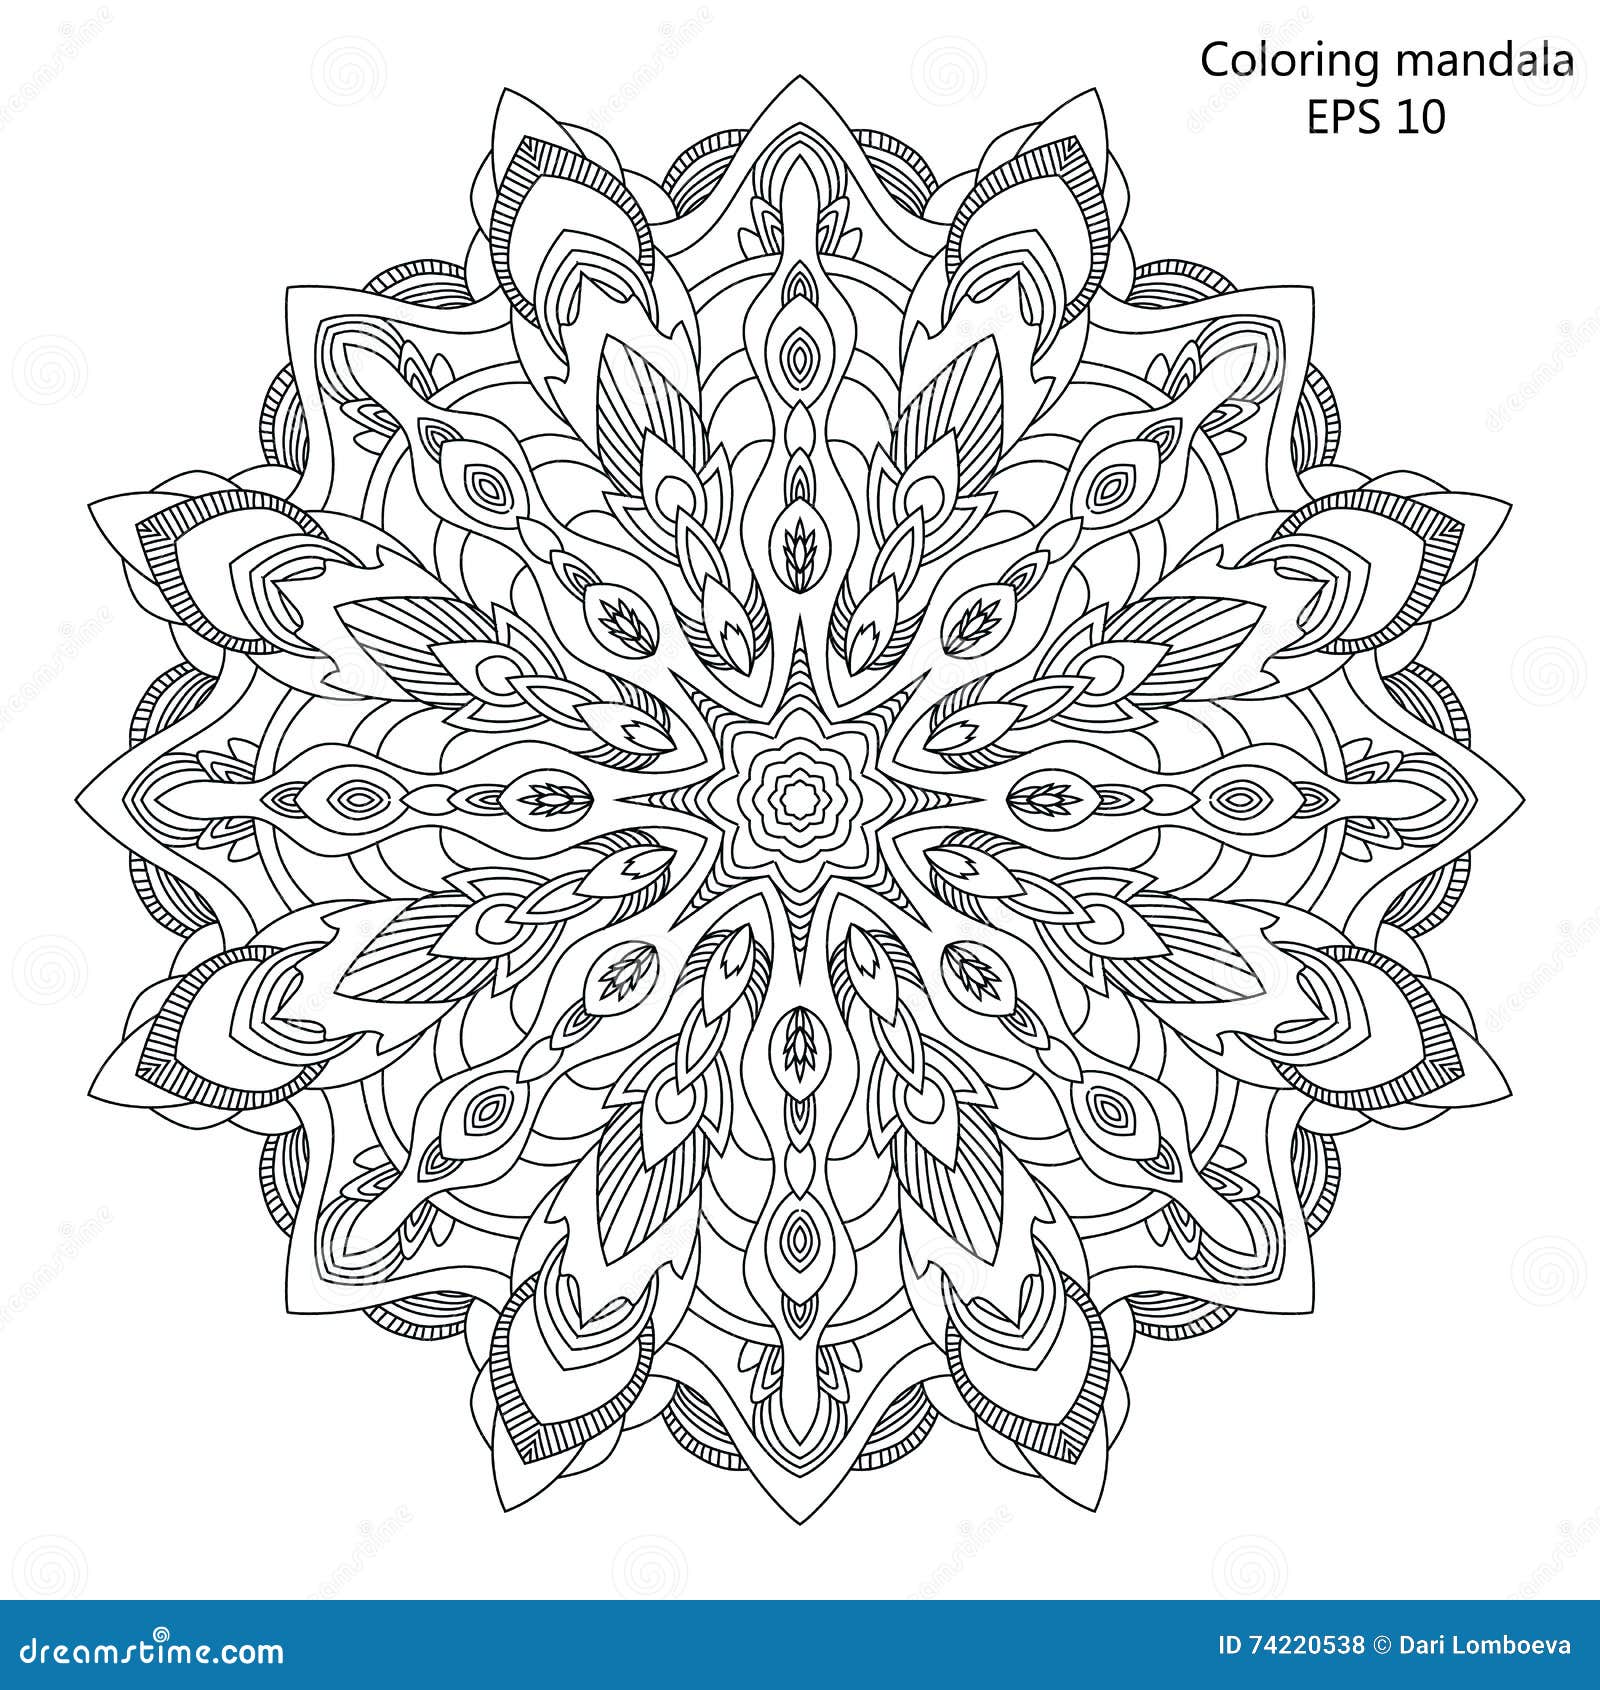 Royalty Free Vector Download Mandala Coloring Page For Adult Vector Illustration Stock Vector